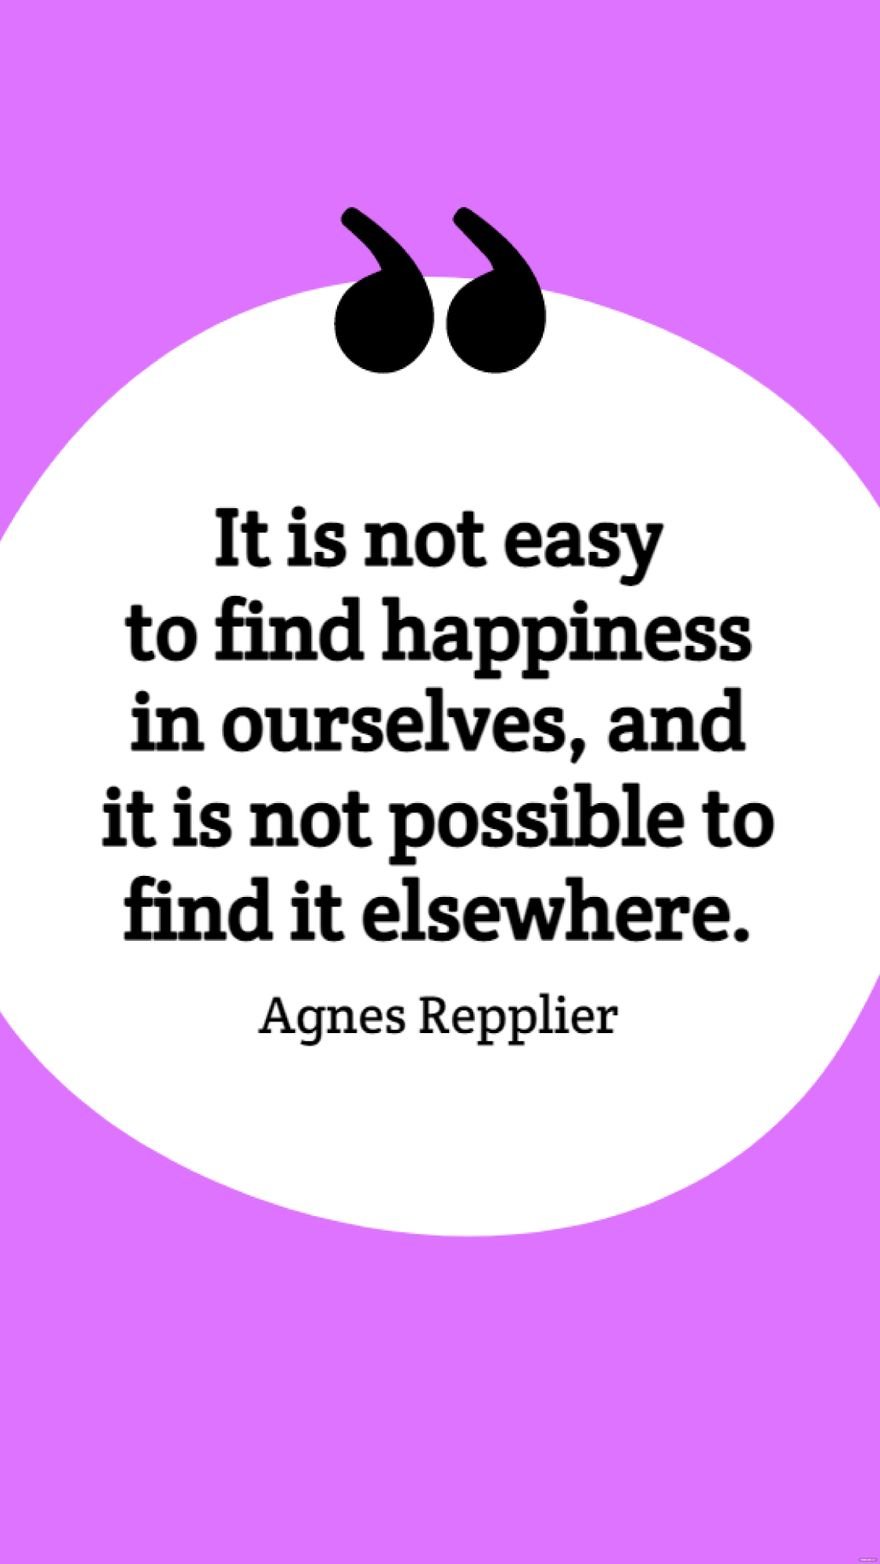 Agnes Repplier - It is not easy to find happiness in ourselves, and it is not possible to find it elsewhere.